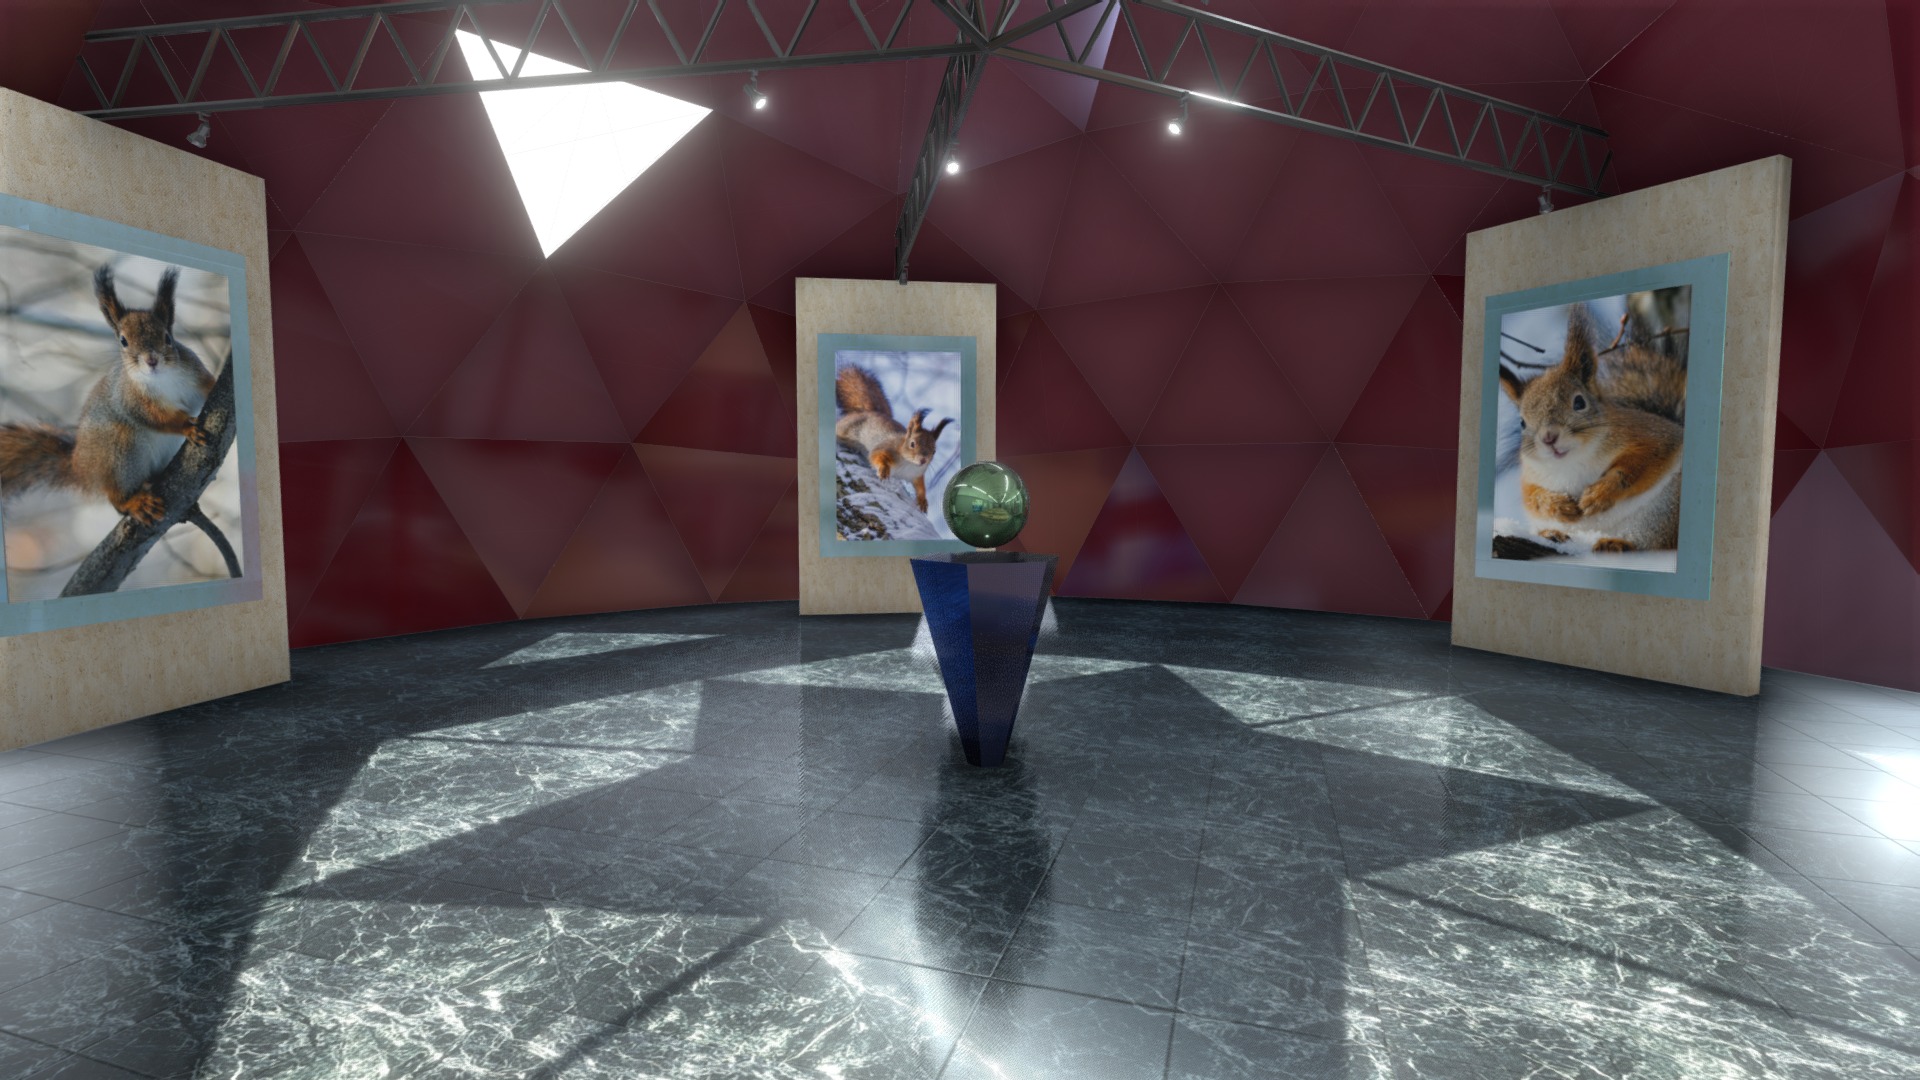 3D model VR Gallery 2 - This is a 3D model of the VR Gallery 2. The 3D model is about a room with art on the wall.